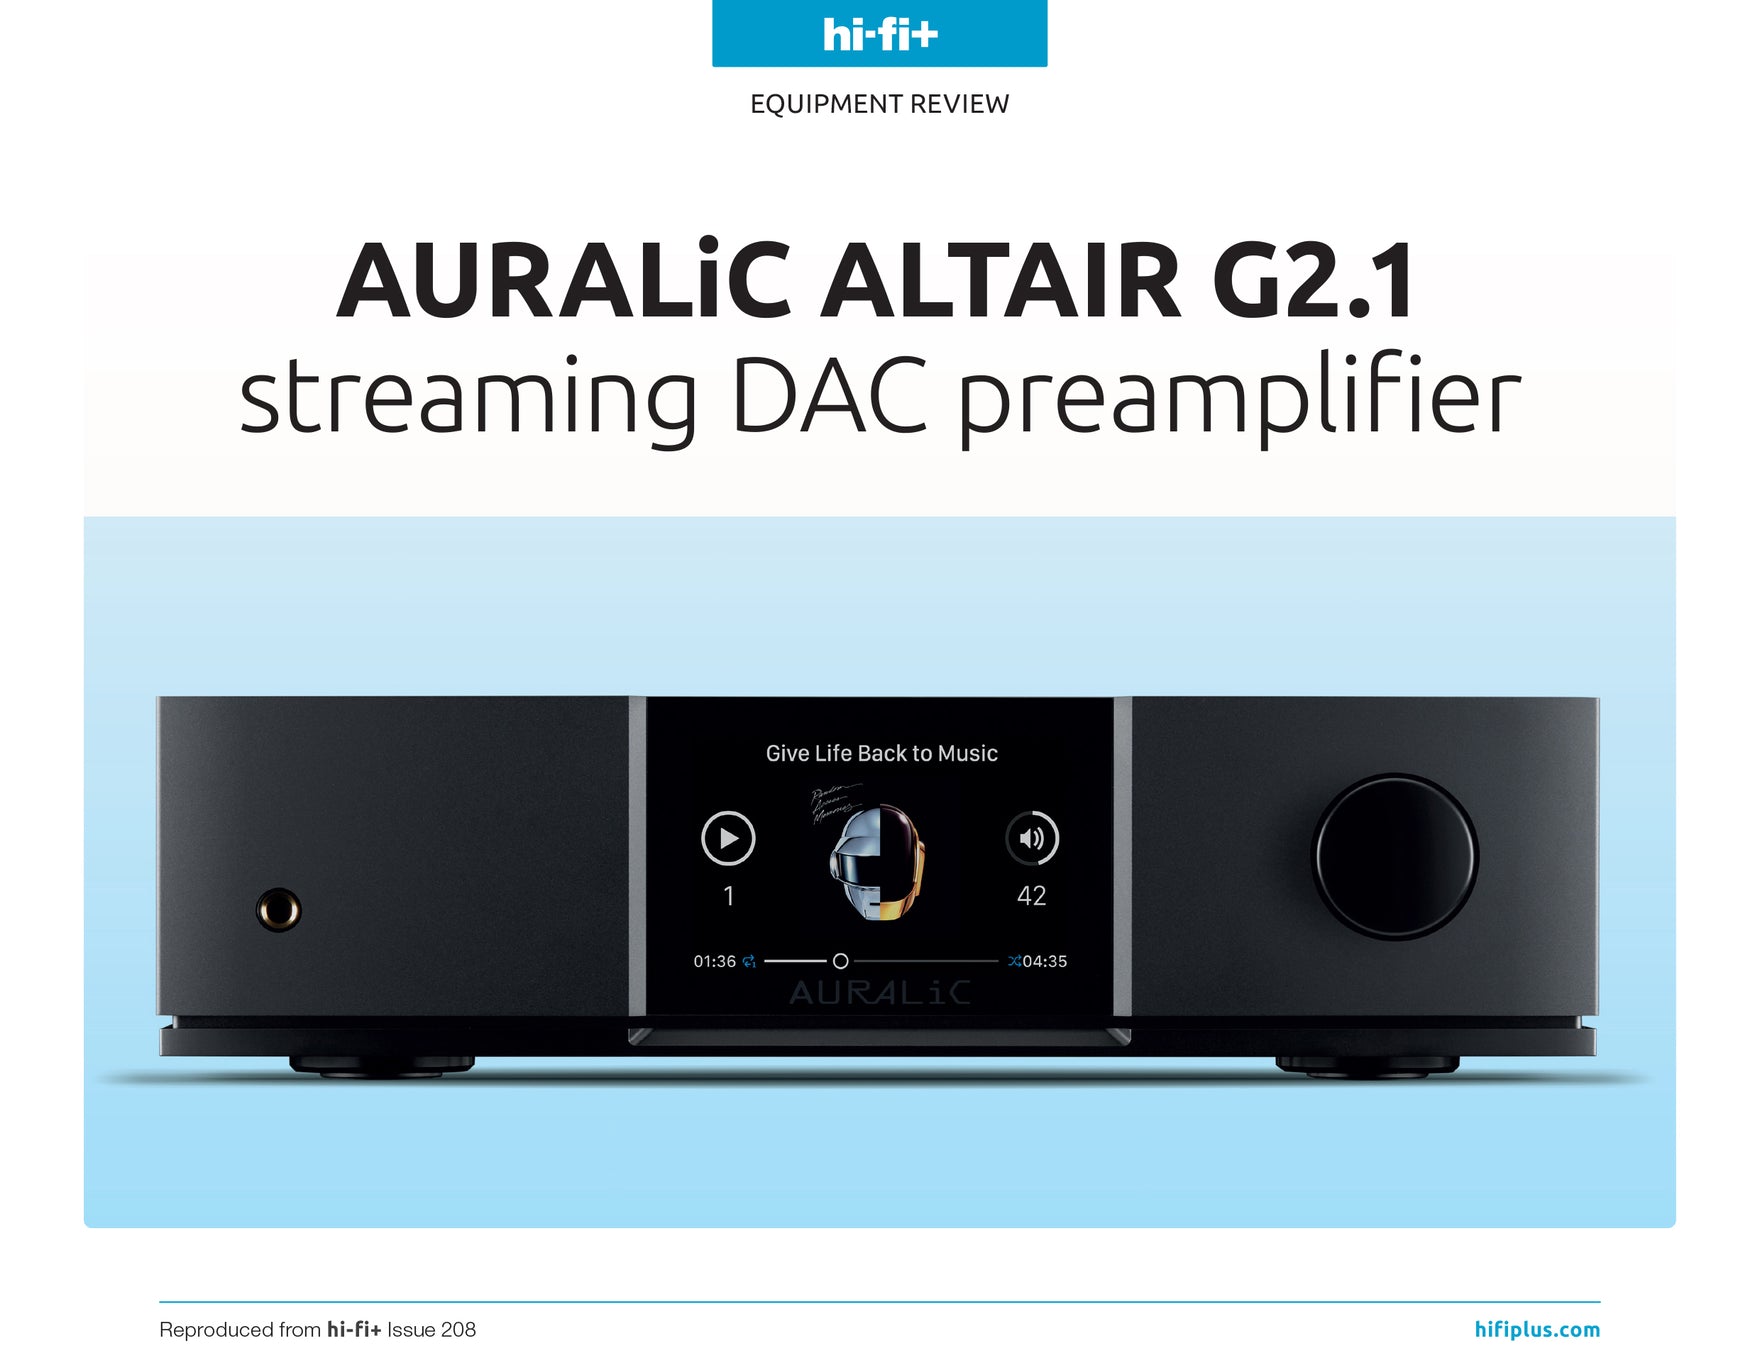 ALTAIR G2.1 Review by HiFi Plus